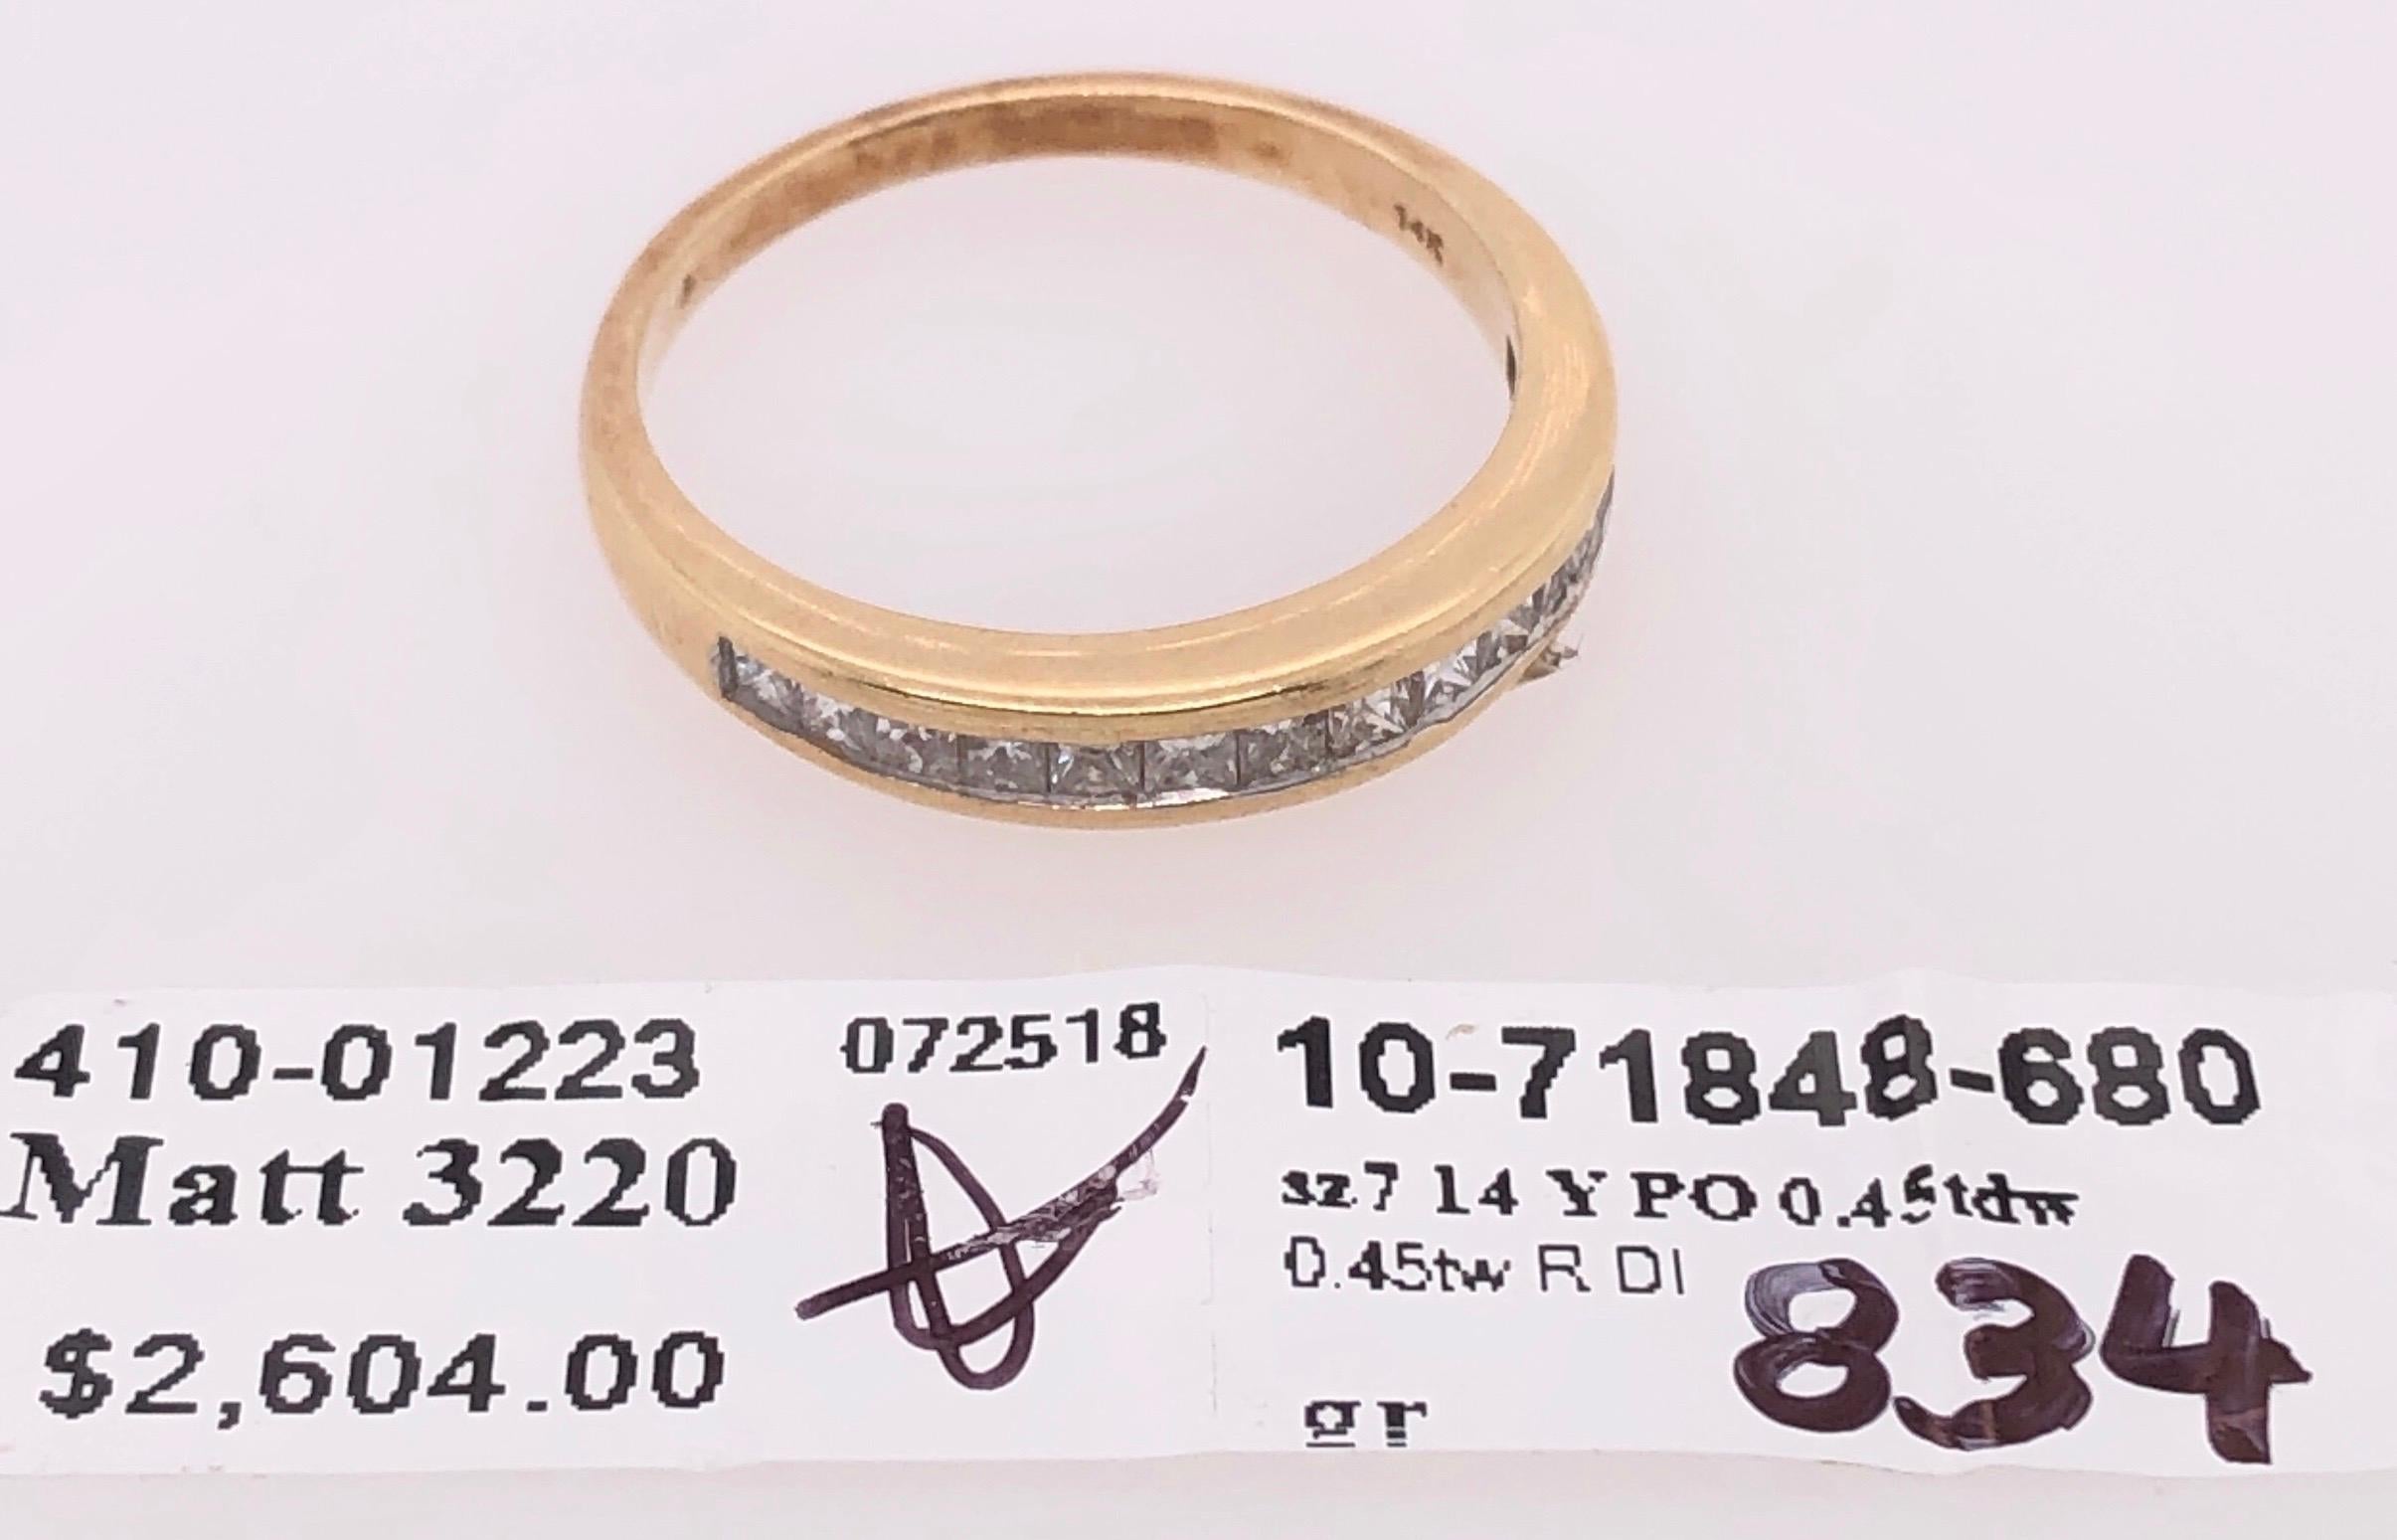 14 Karat Yellow Gold and Diamond Band / Wedding Ring 0.45 TDW In Good Condition For Sale In Stamford, CT